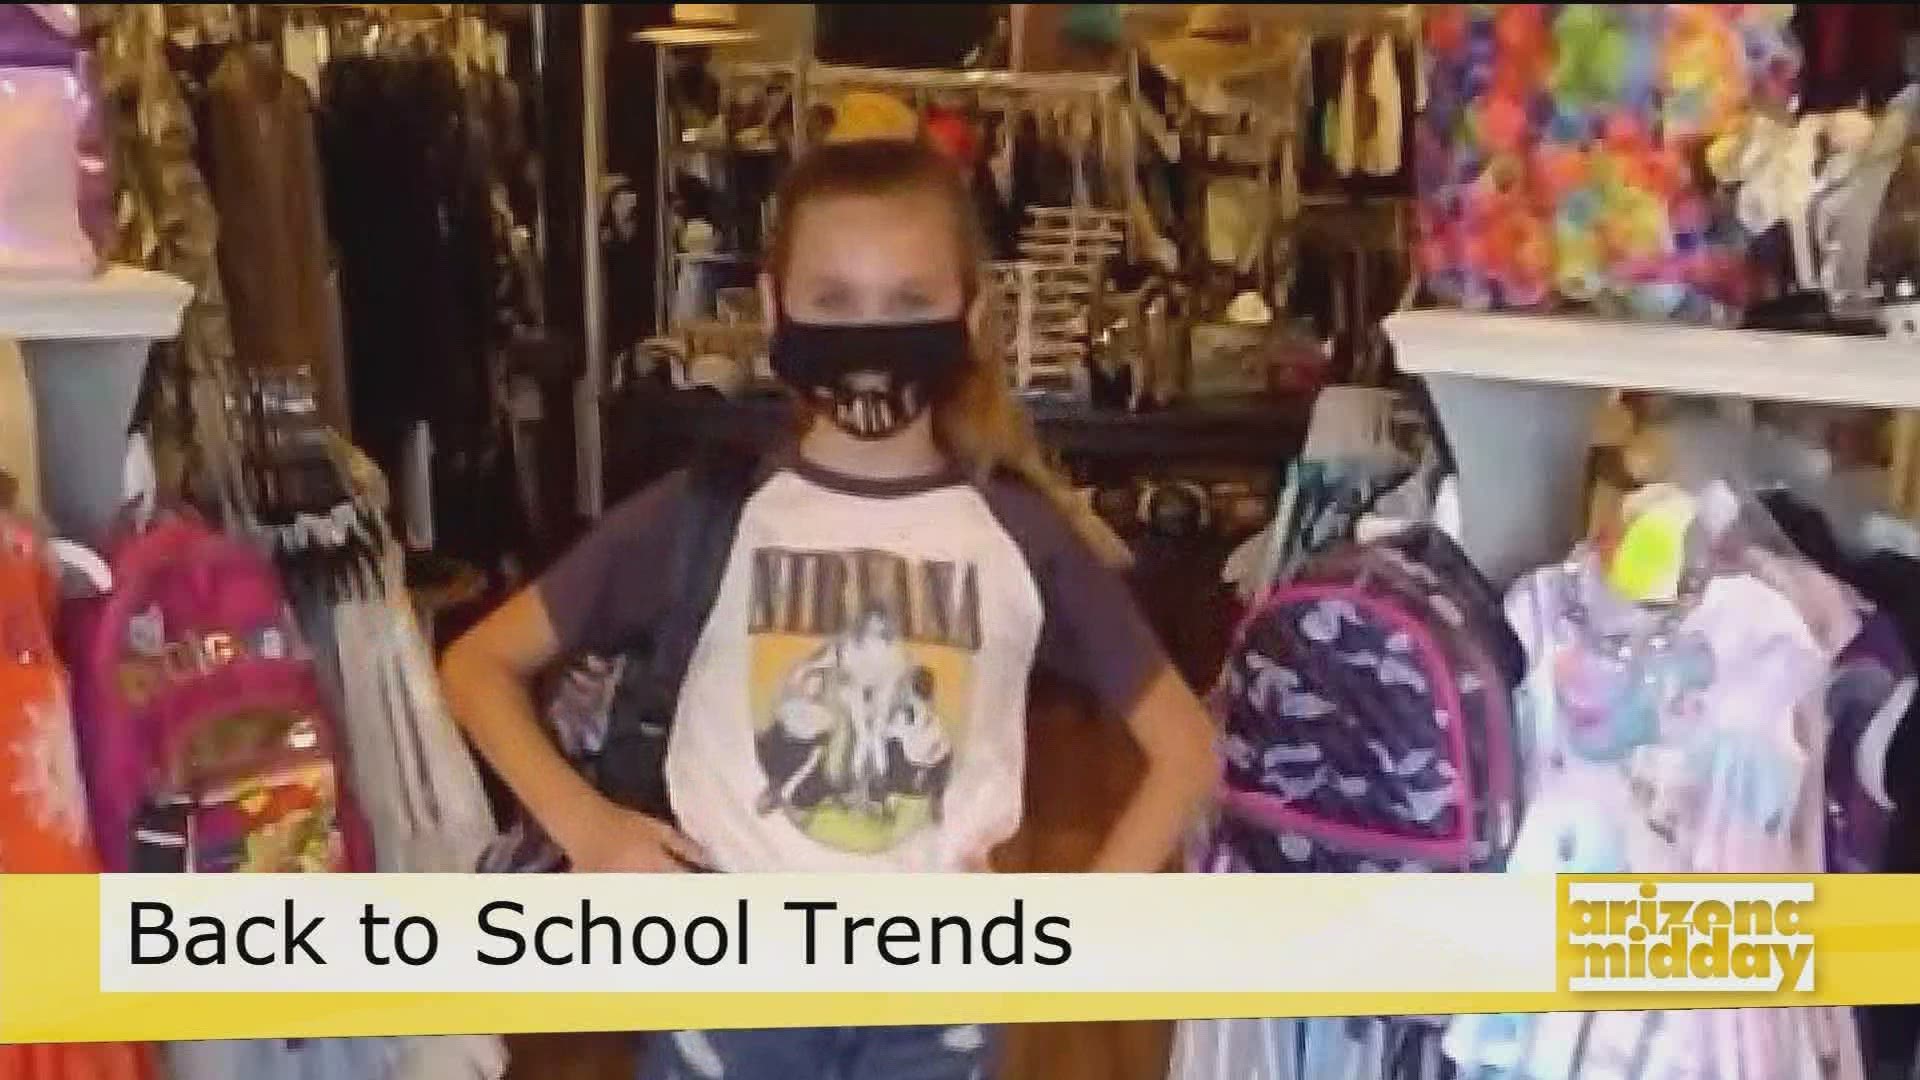 Mariter Torres, Owner of Daniela Jay Boutique, shows us some of the top trending styles for kids this school year